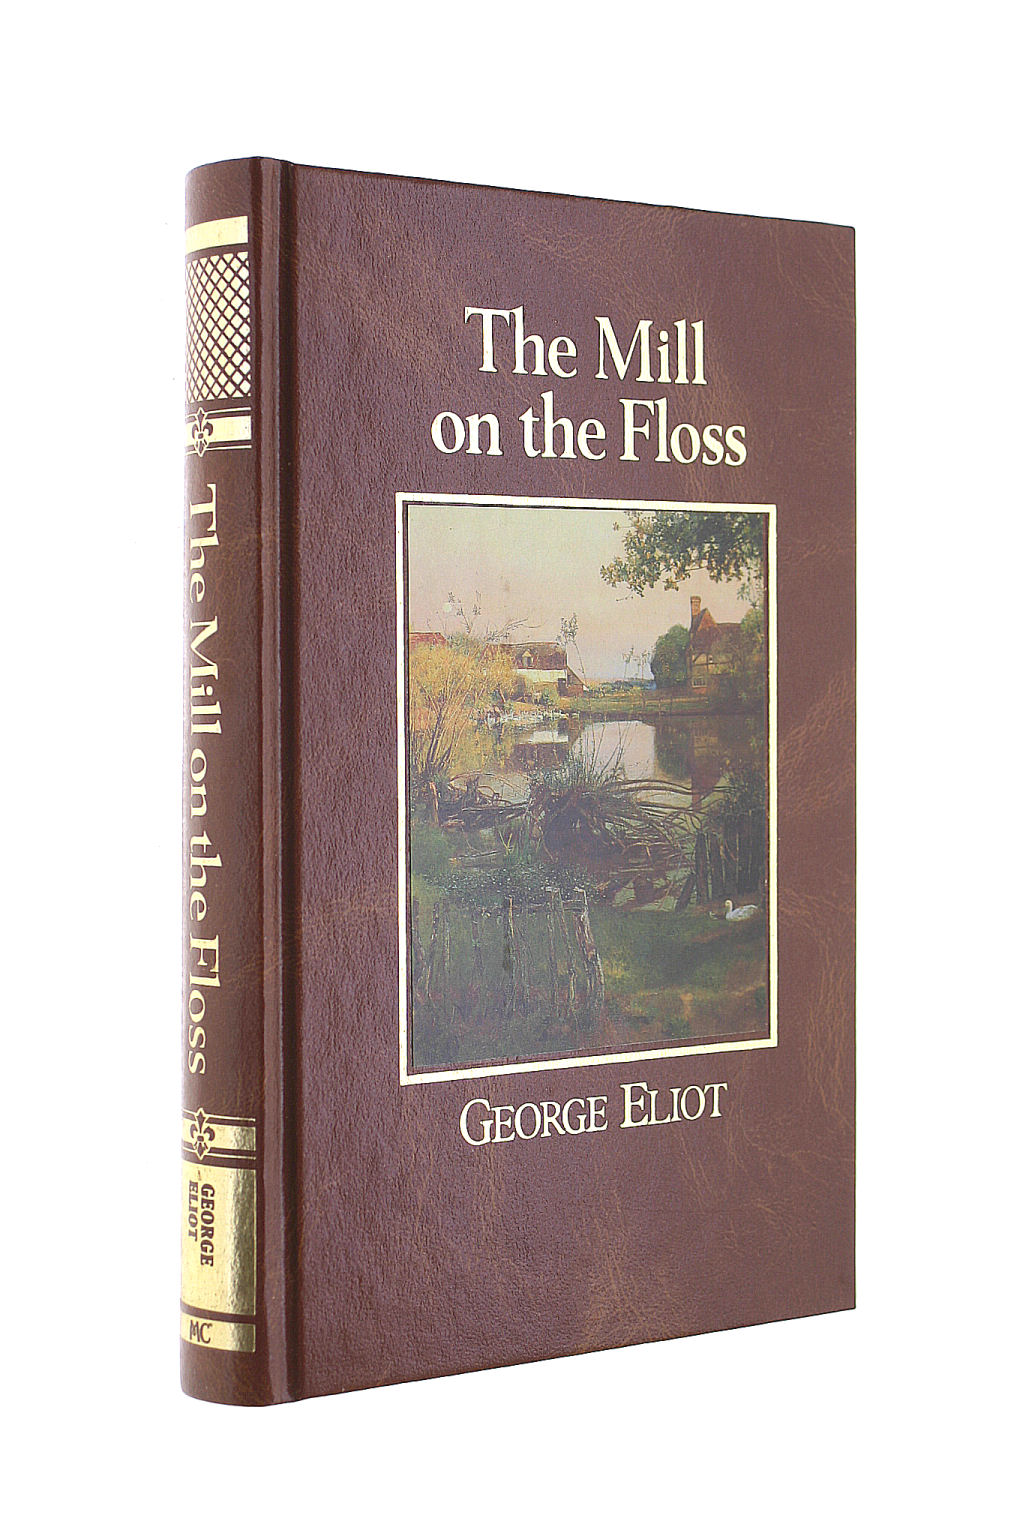 GEORGE ELIOT - The Mill on the Floss